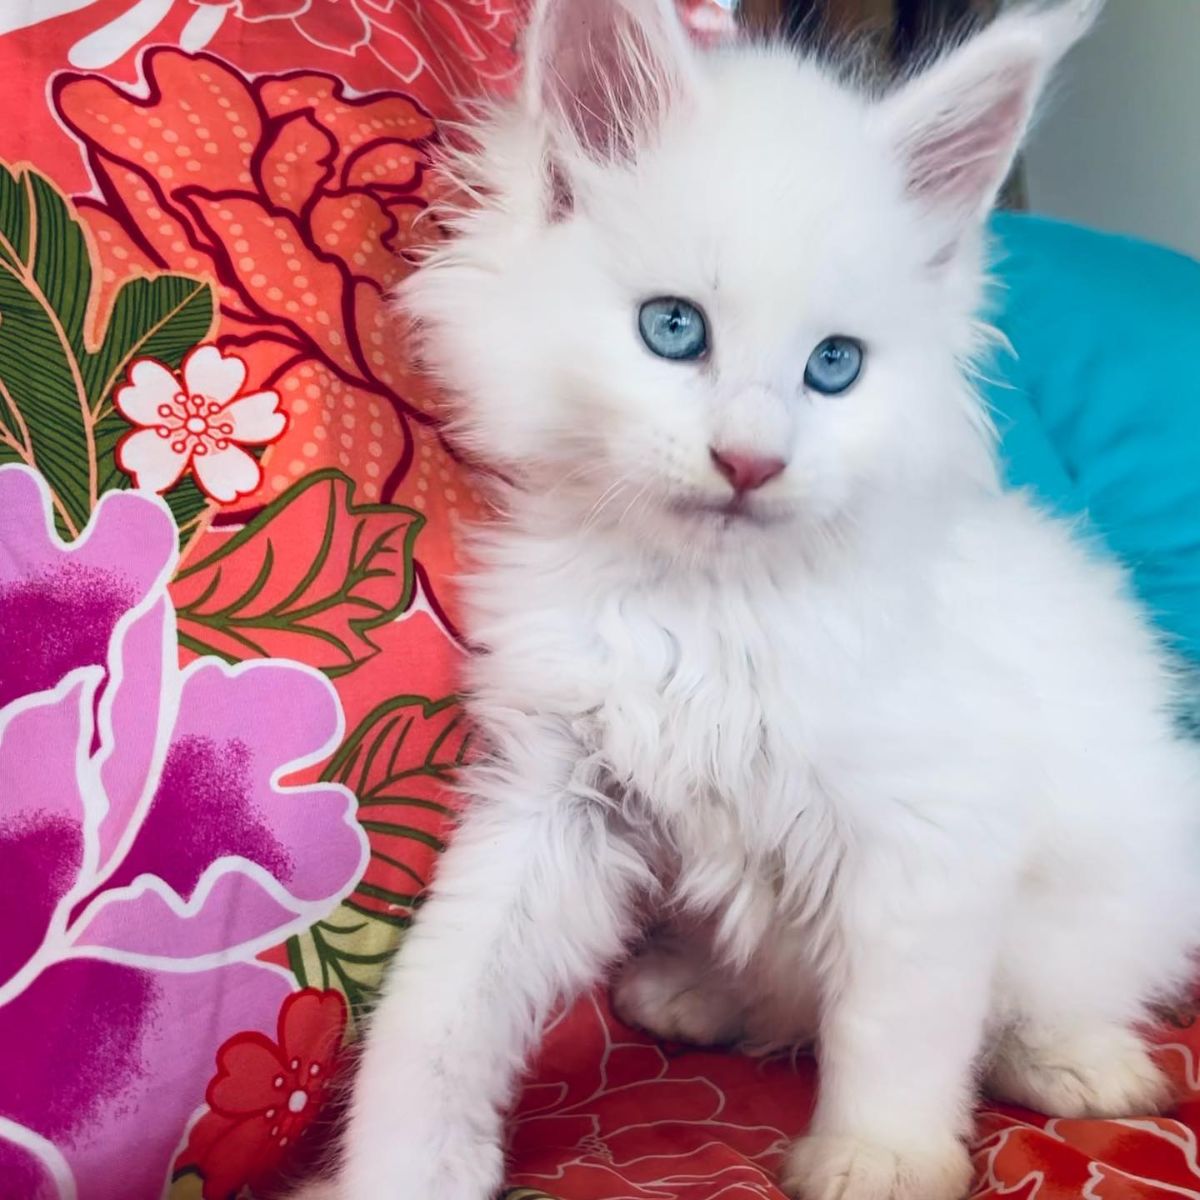 A cute white maine coon kitten with blue eyes sitting on a couch.